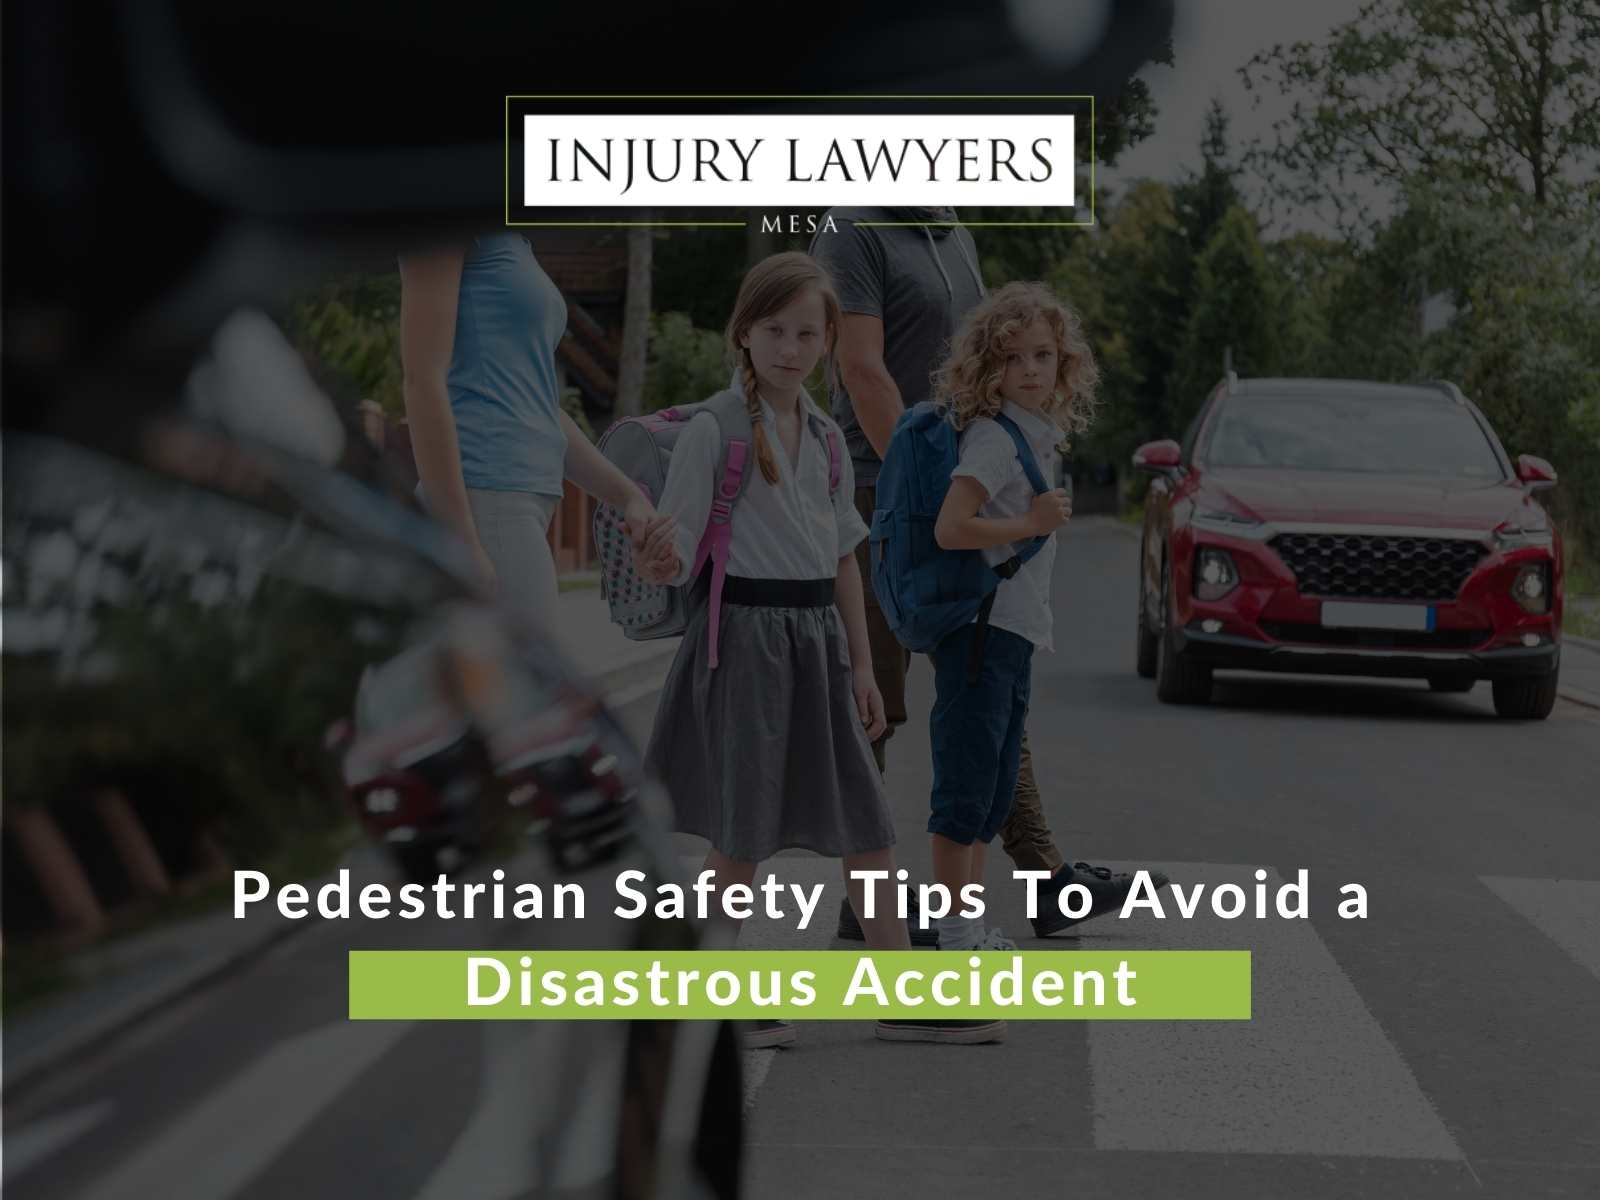 Pedestrian Safety Tips To Avoid a Disastrous Accident